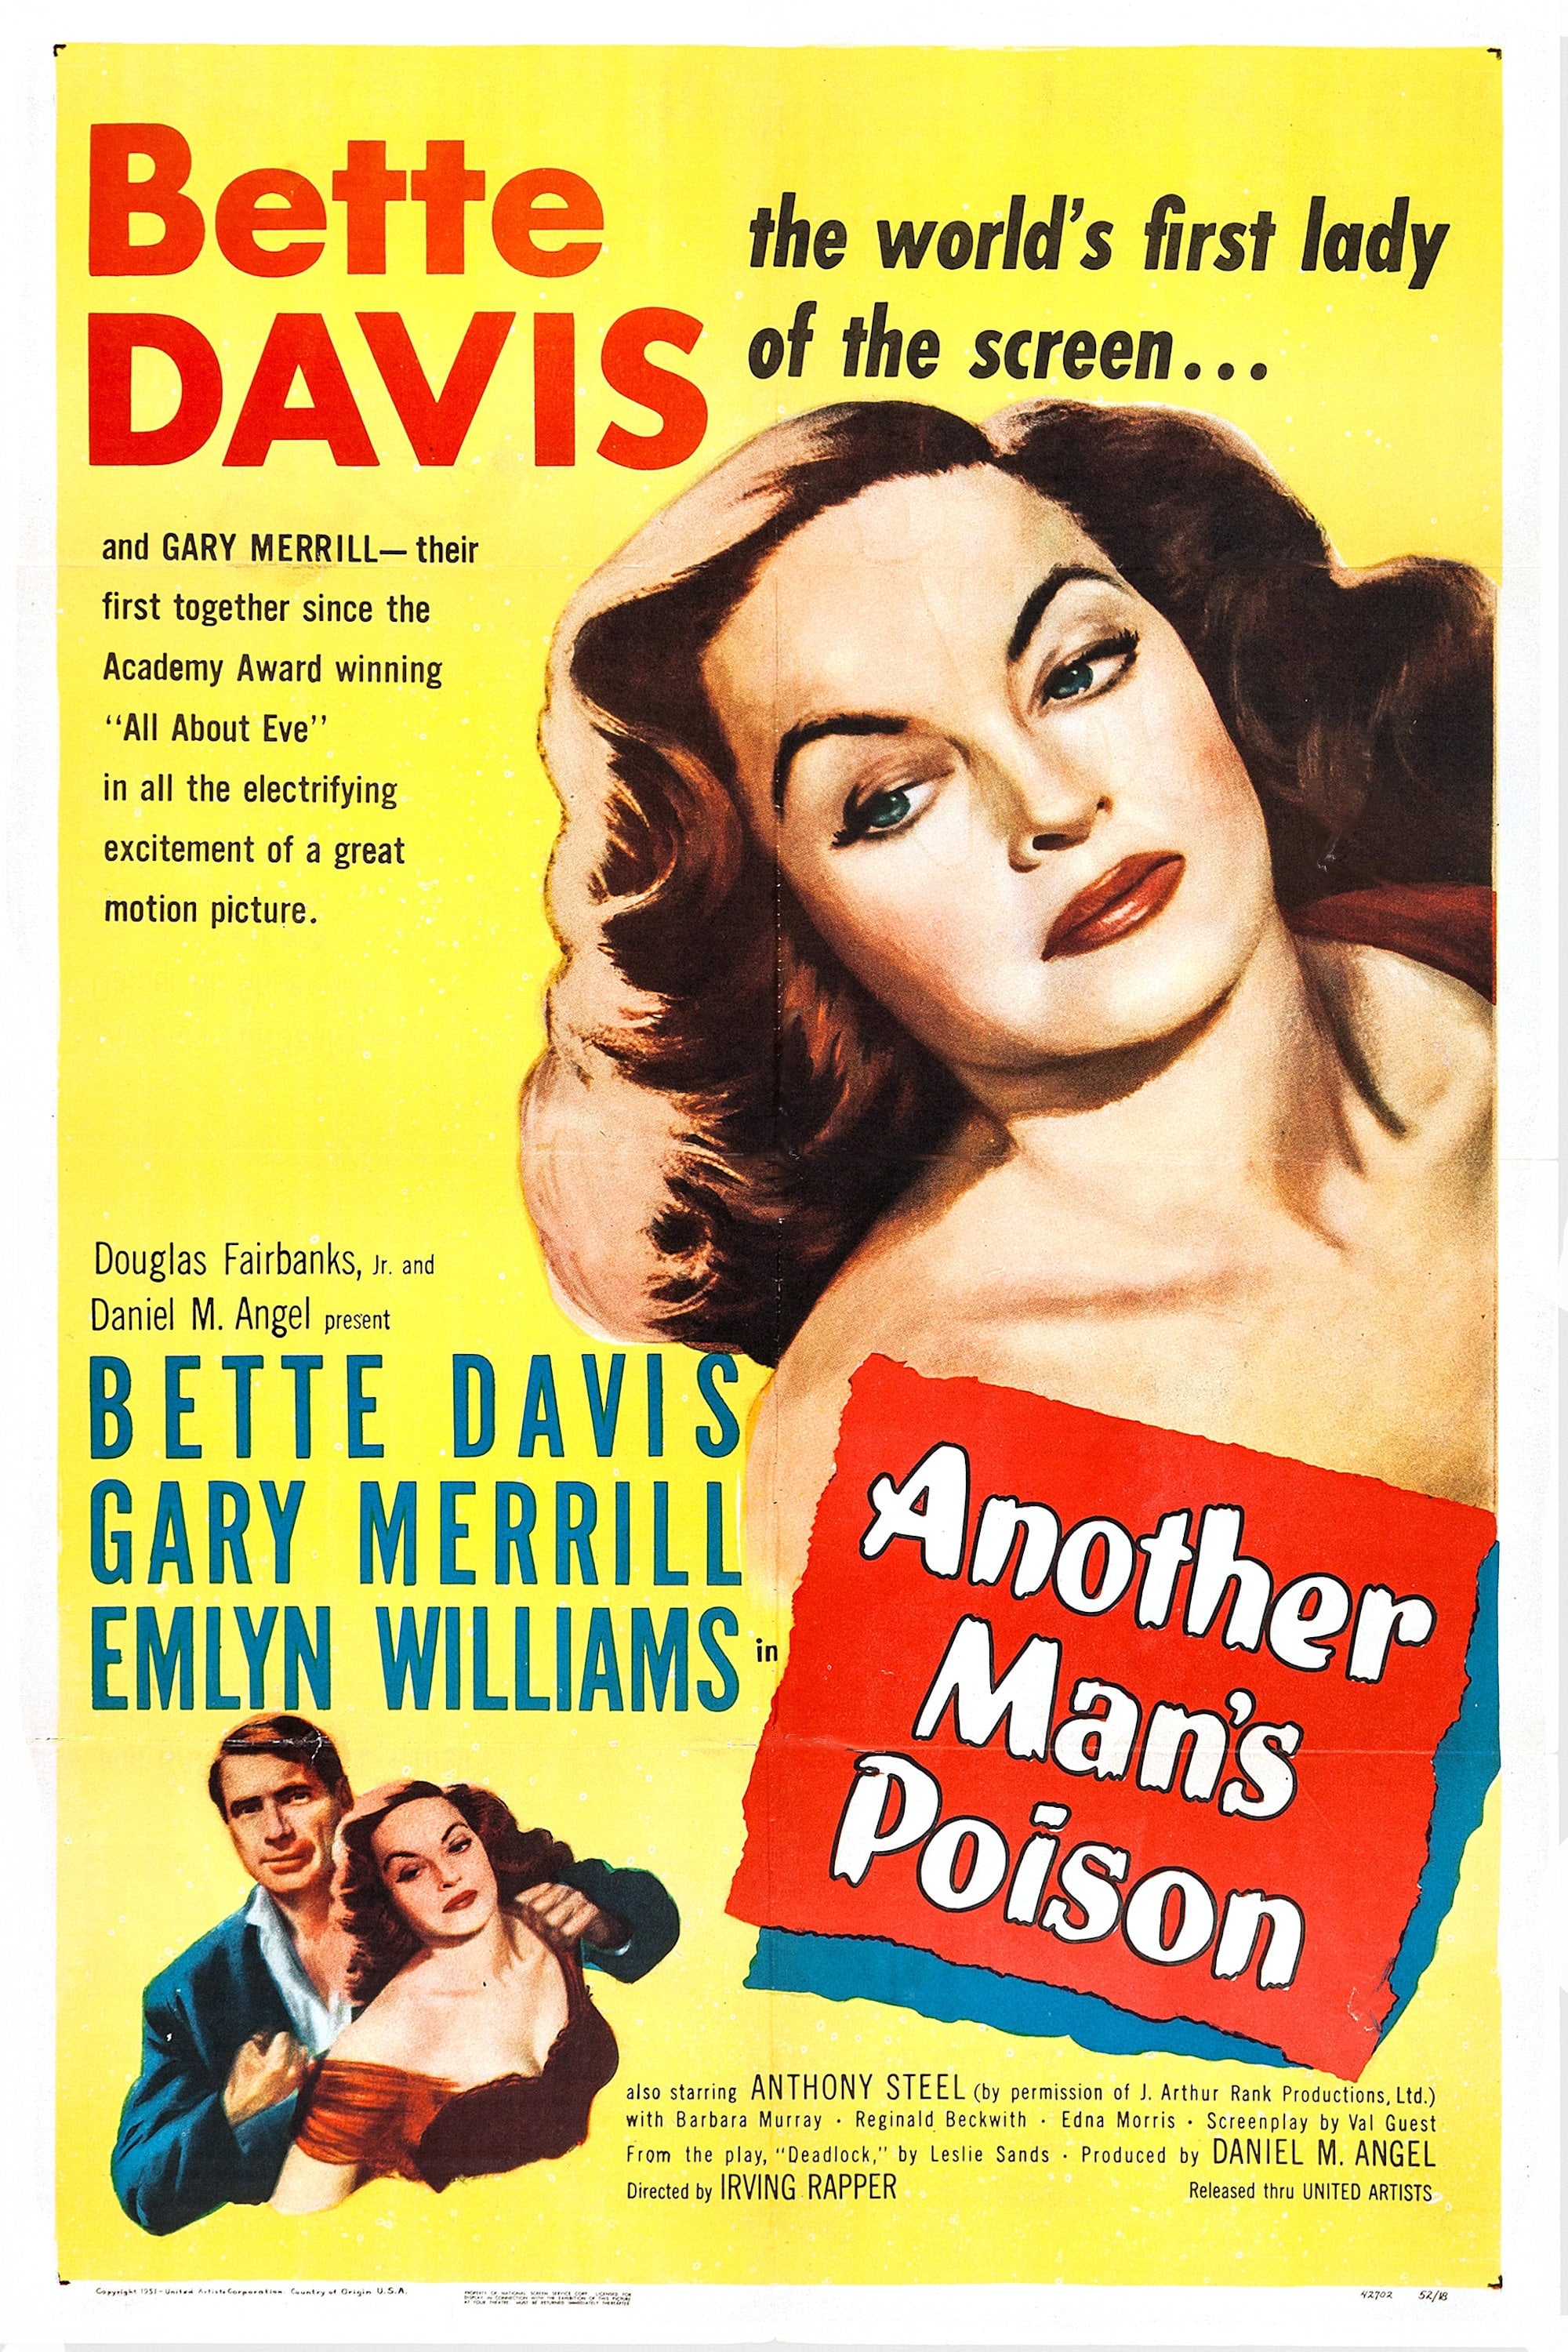 ANOTHER MAN'S POISON (1951)